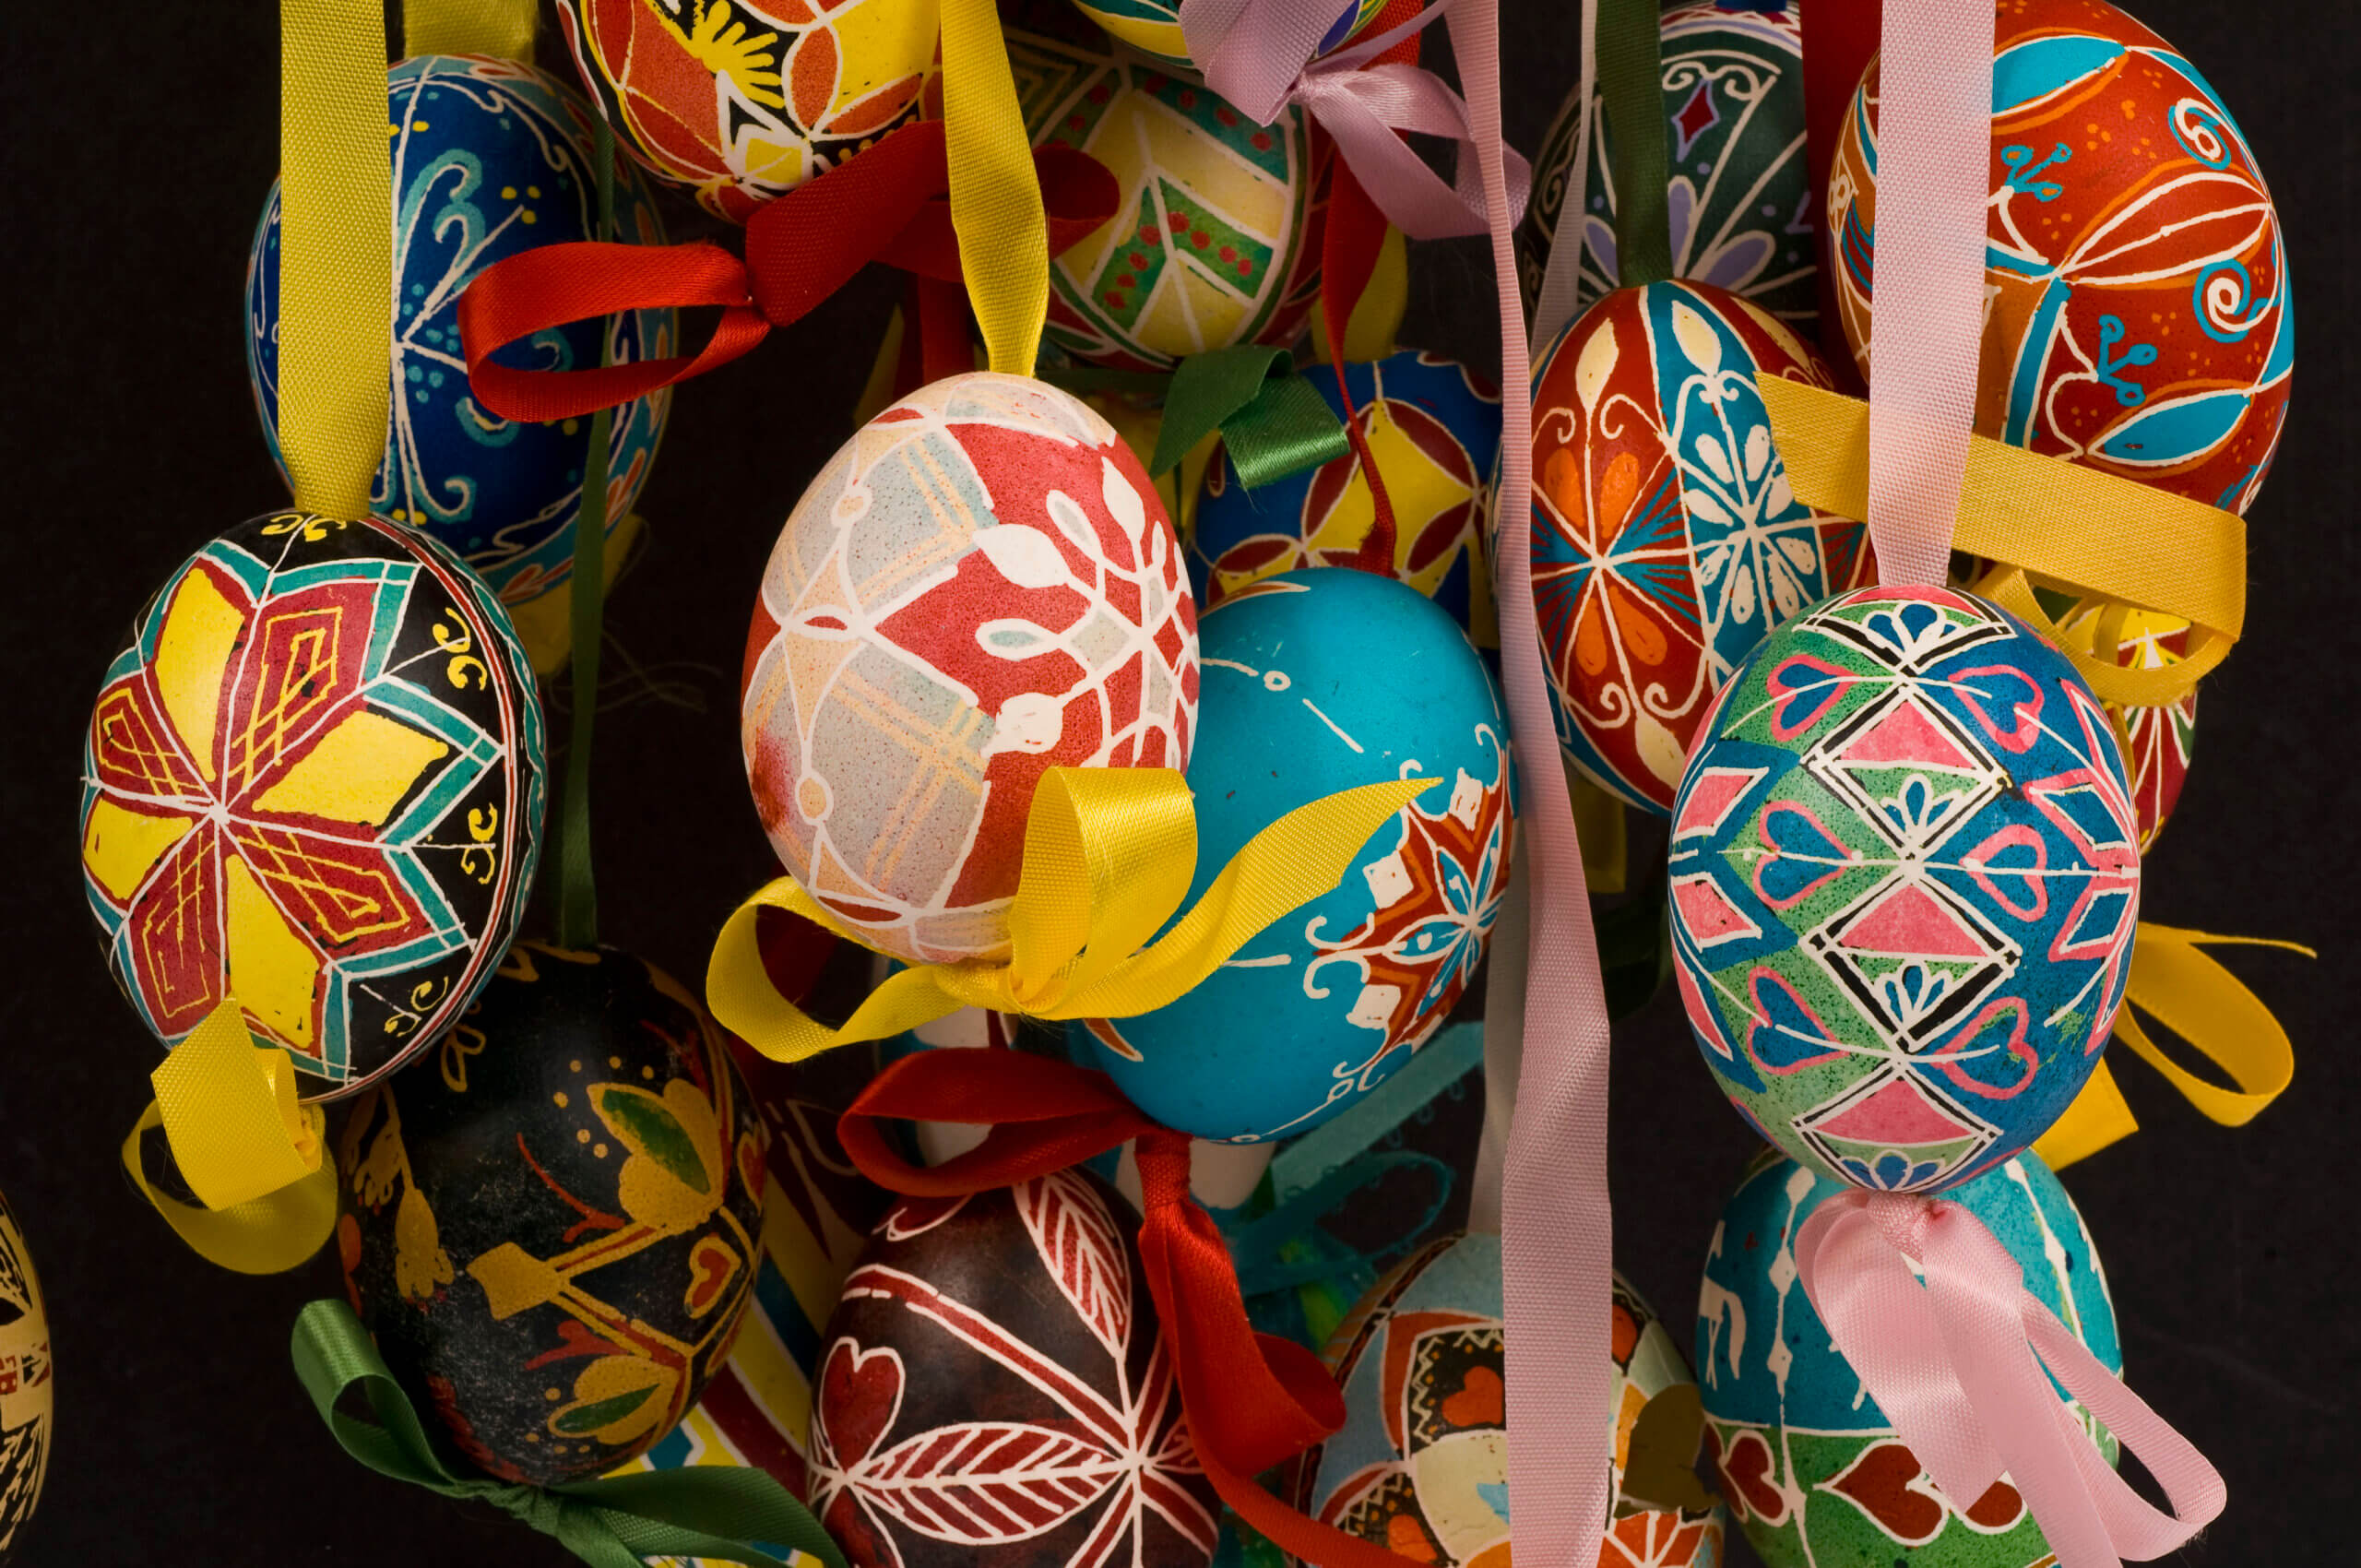 Decorative Hand painted Slavic Easter eggs